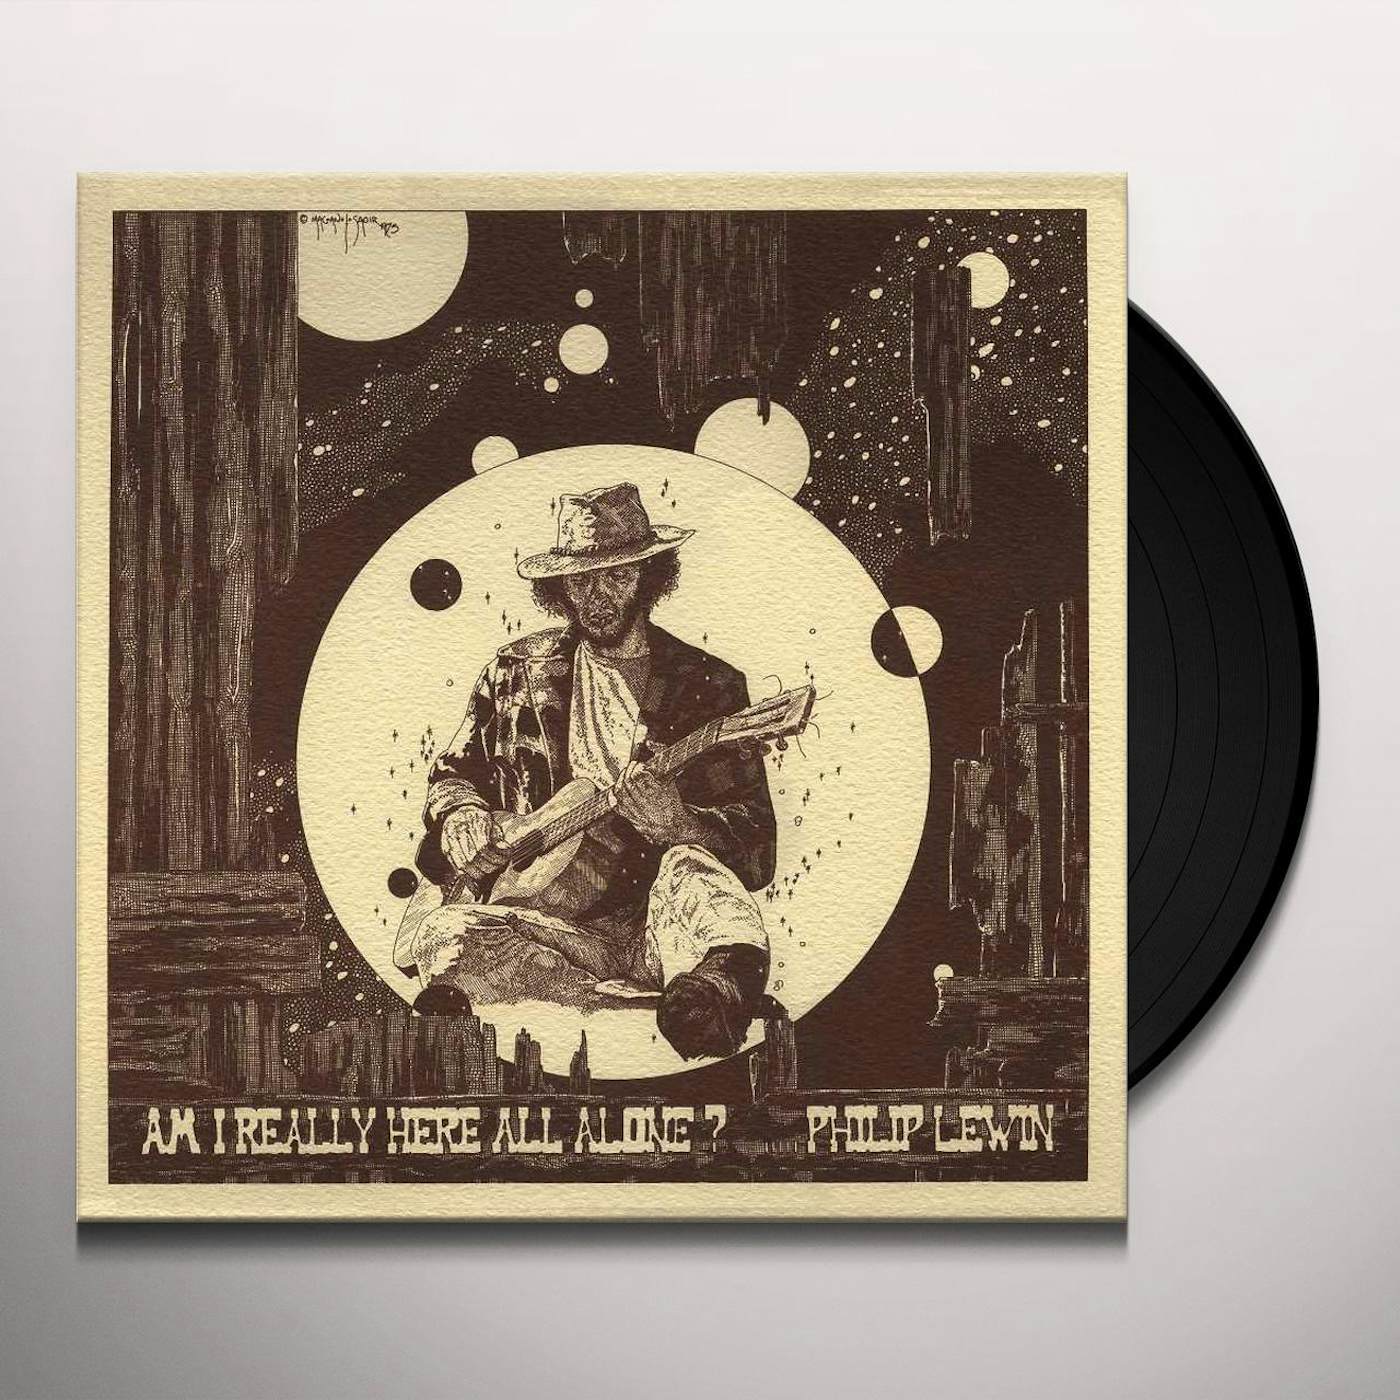 Philip Lewin AM I REALLY HERE ALL ALONE Vinyl Record